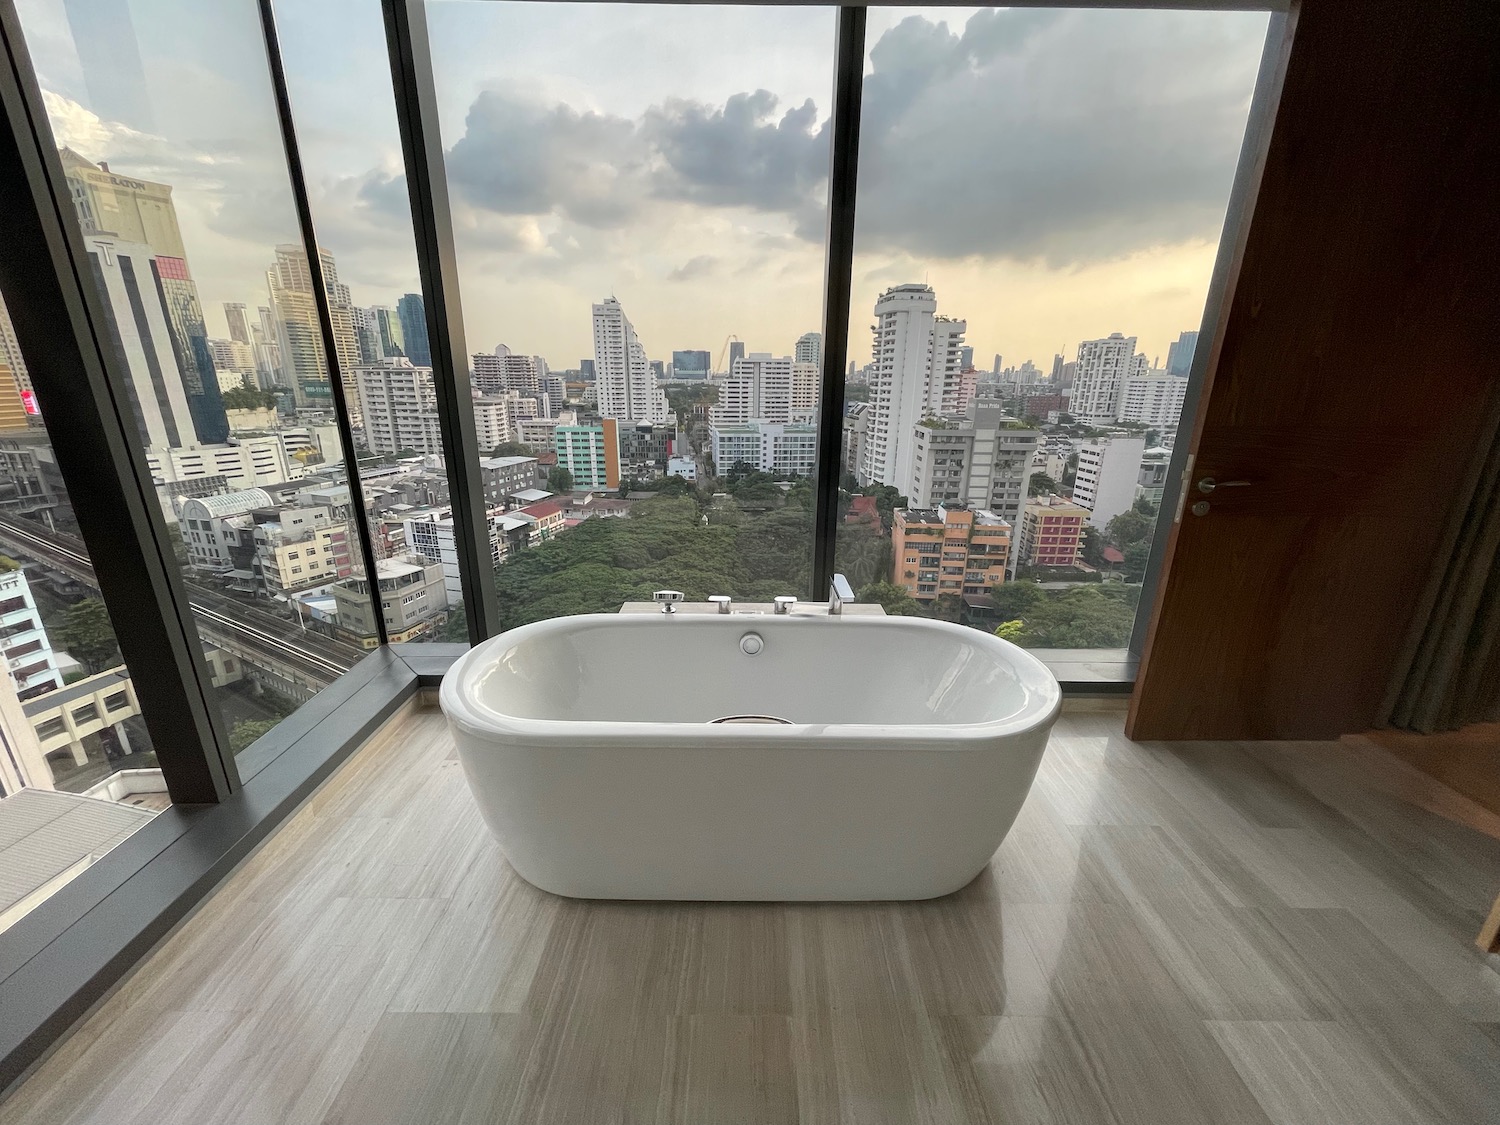 a bathtub in a room with a view of a city